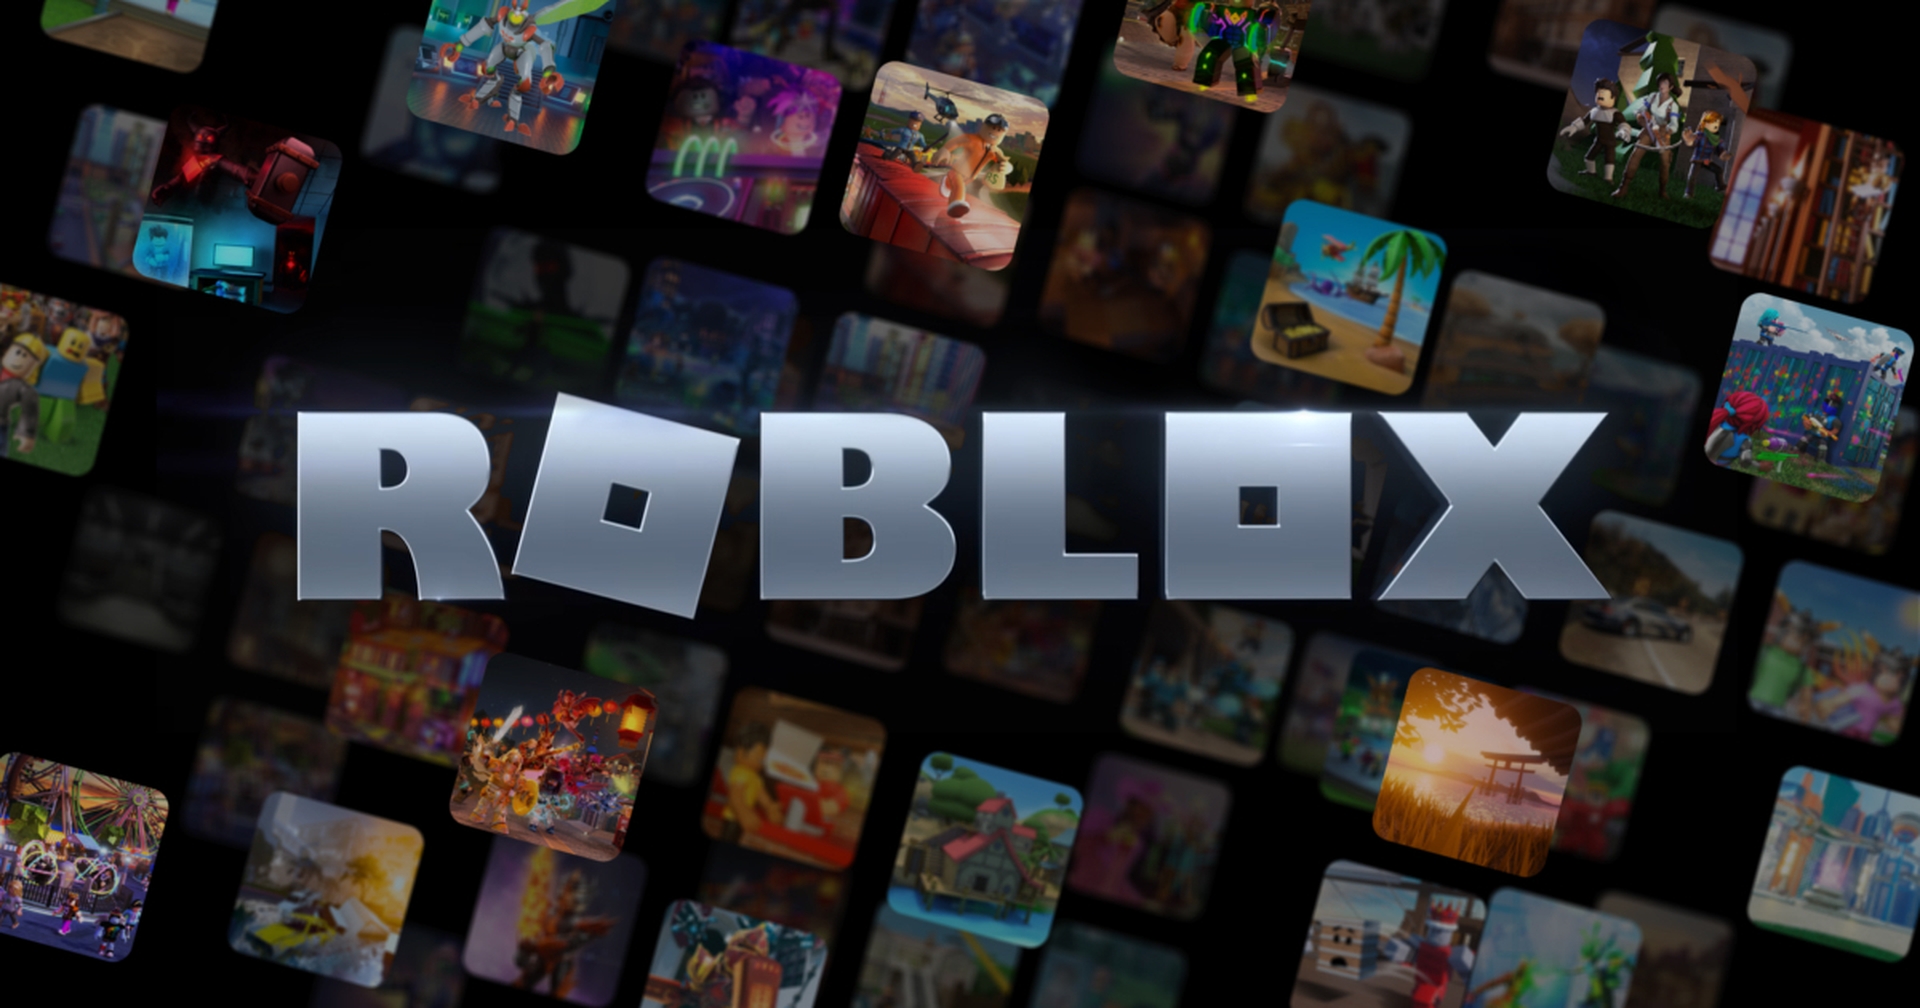 Roblox is all the hype right now and they just added an in-game voice chat feature. If you are wondering how to activate voice chat in Roblox, we've got you covered.